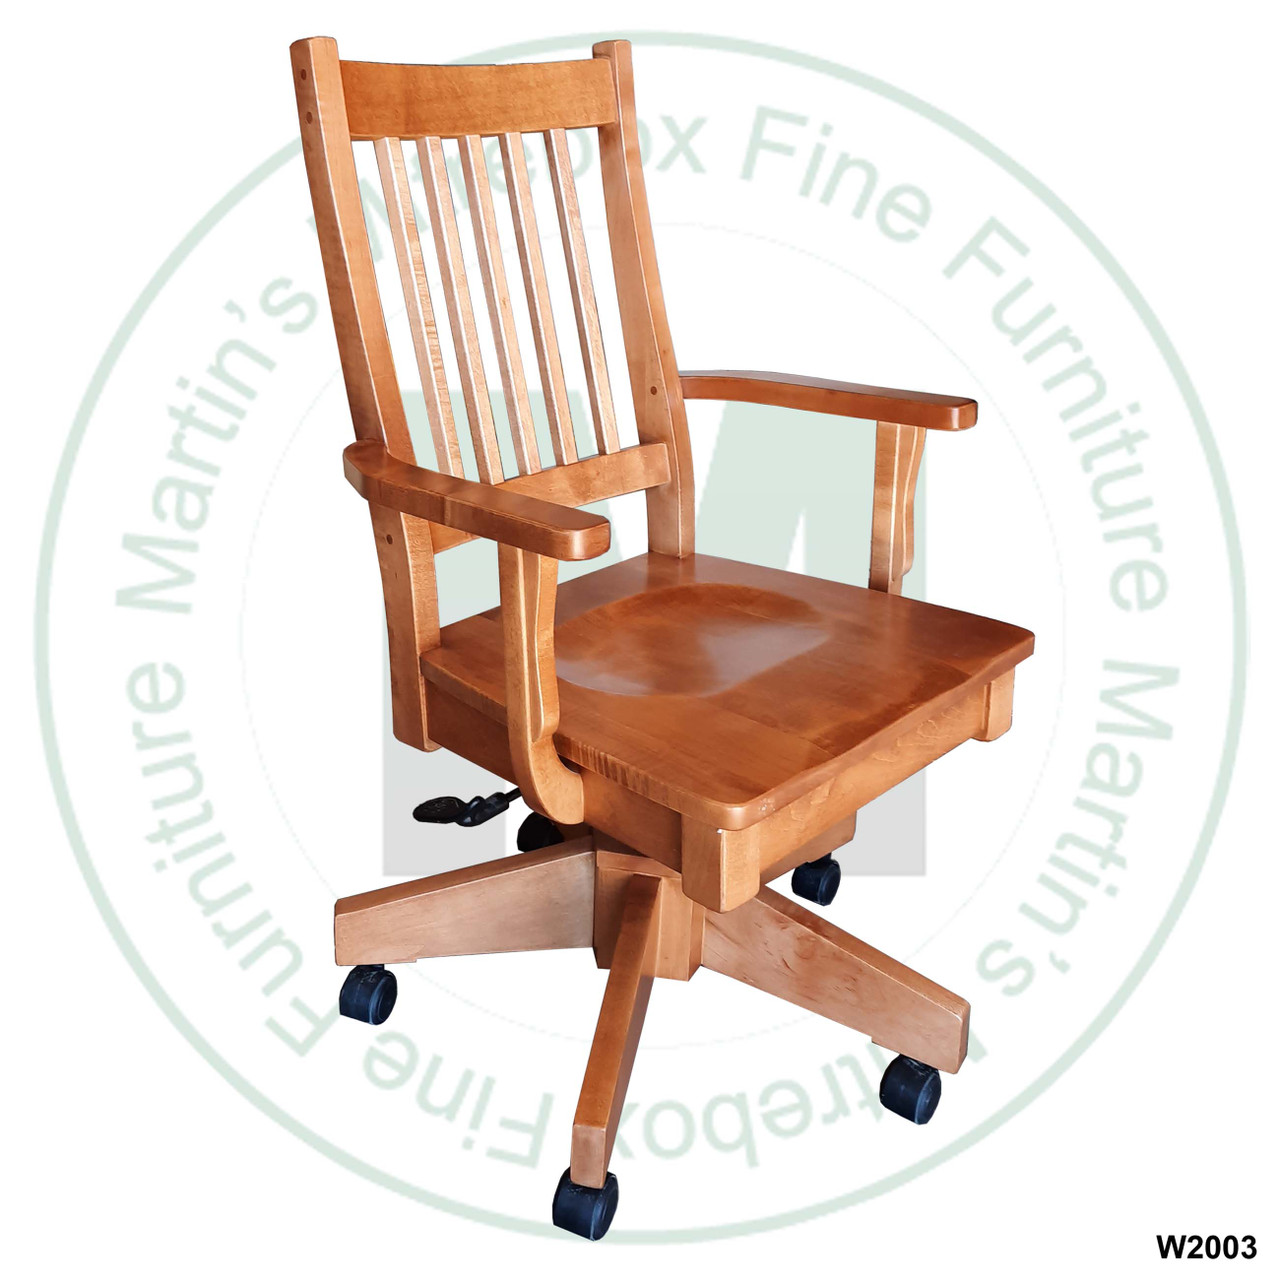 Wormy Maple Mini Mission Office Chair Has Wood Seat